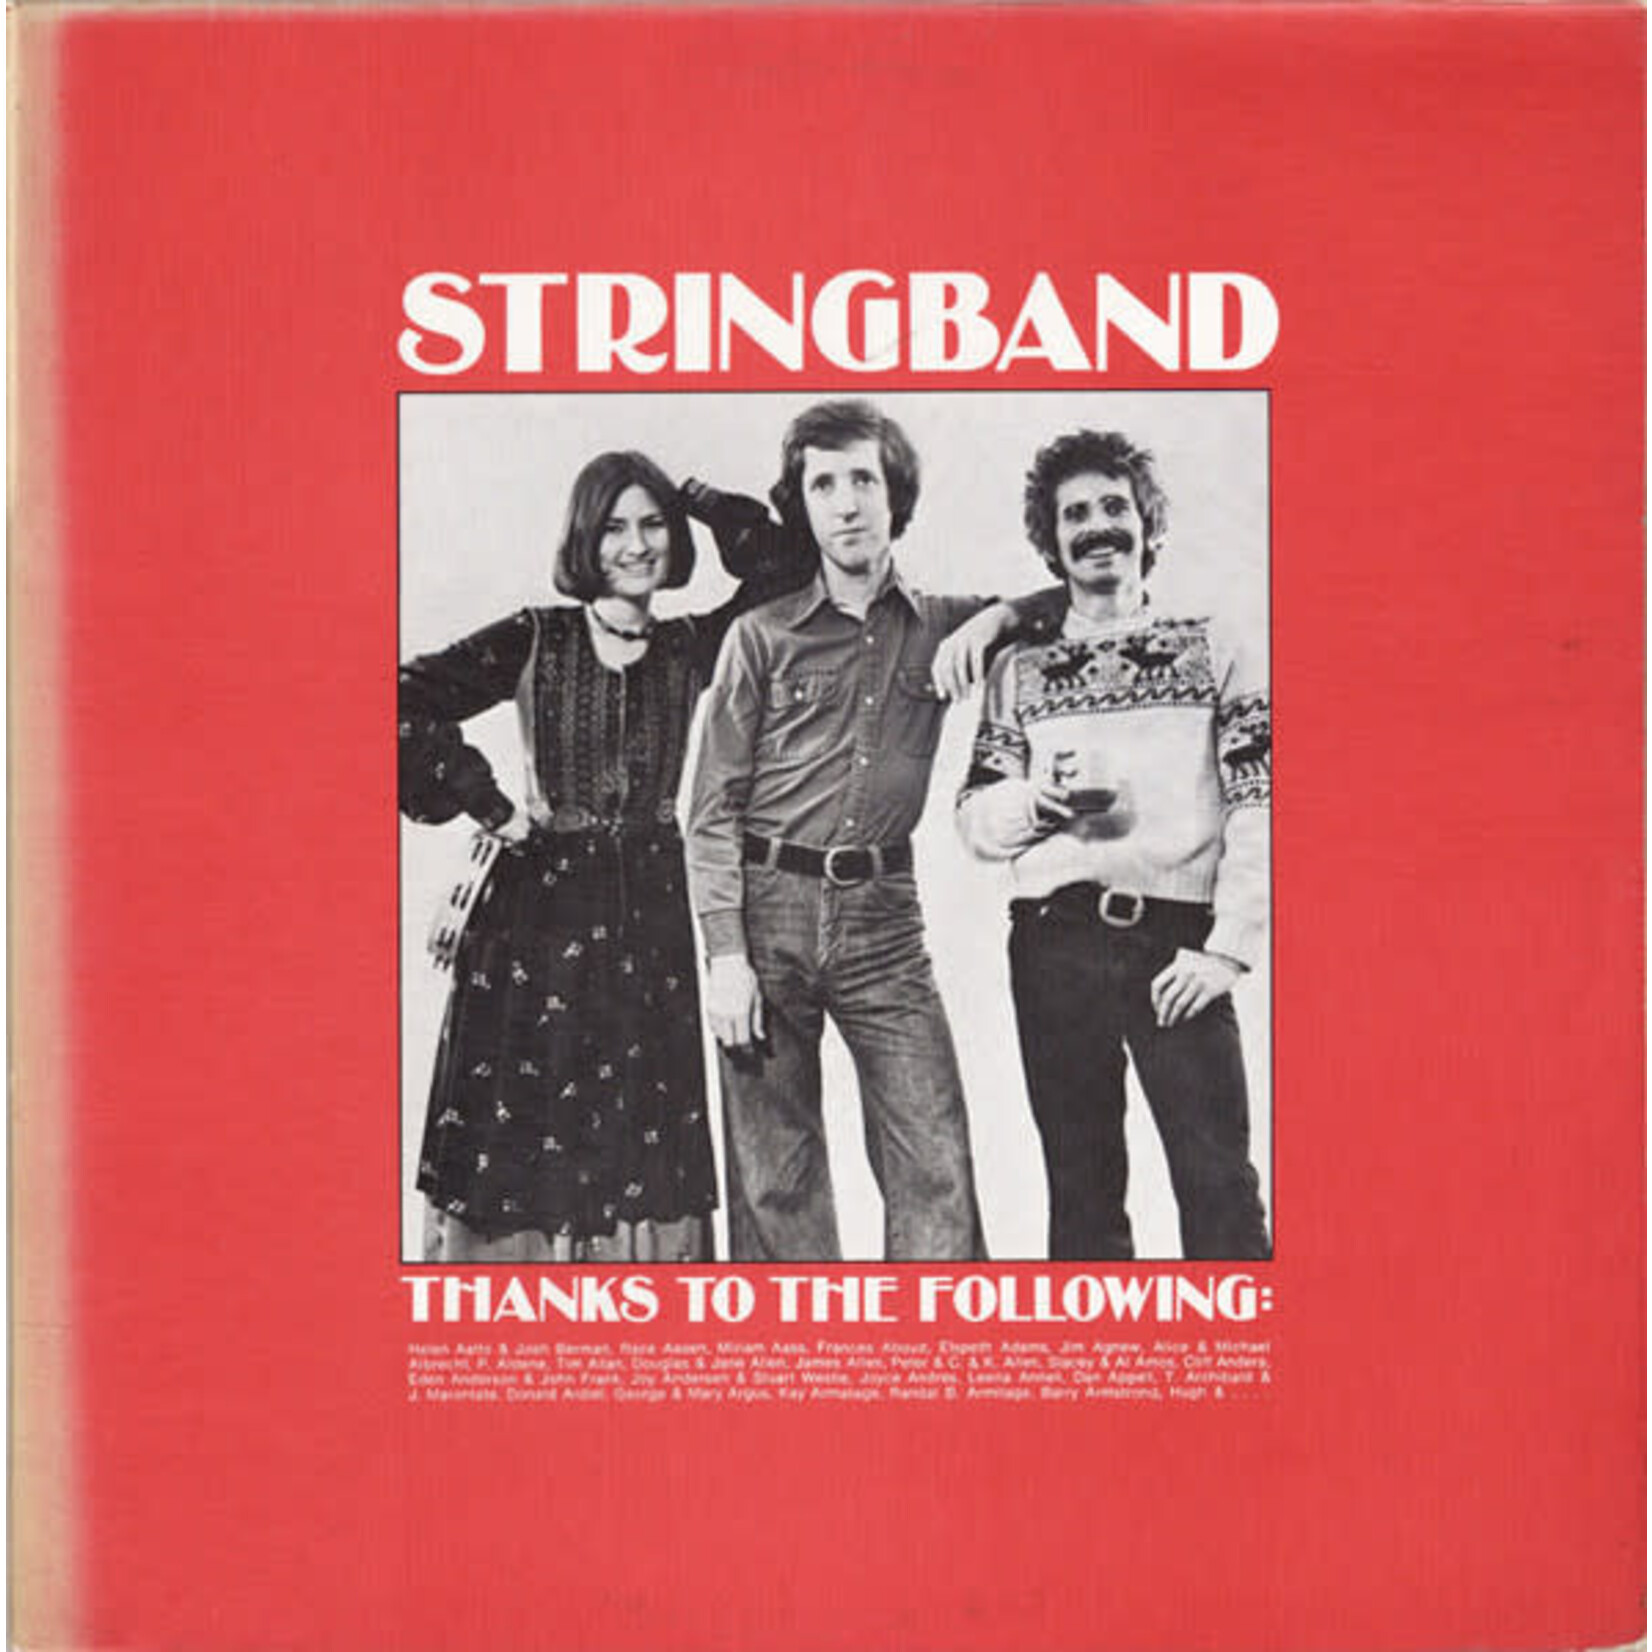 [Vintage] Stringband - Thanks To The Following